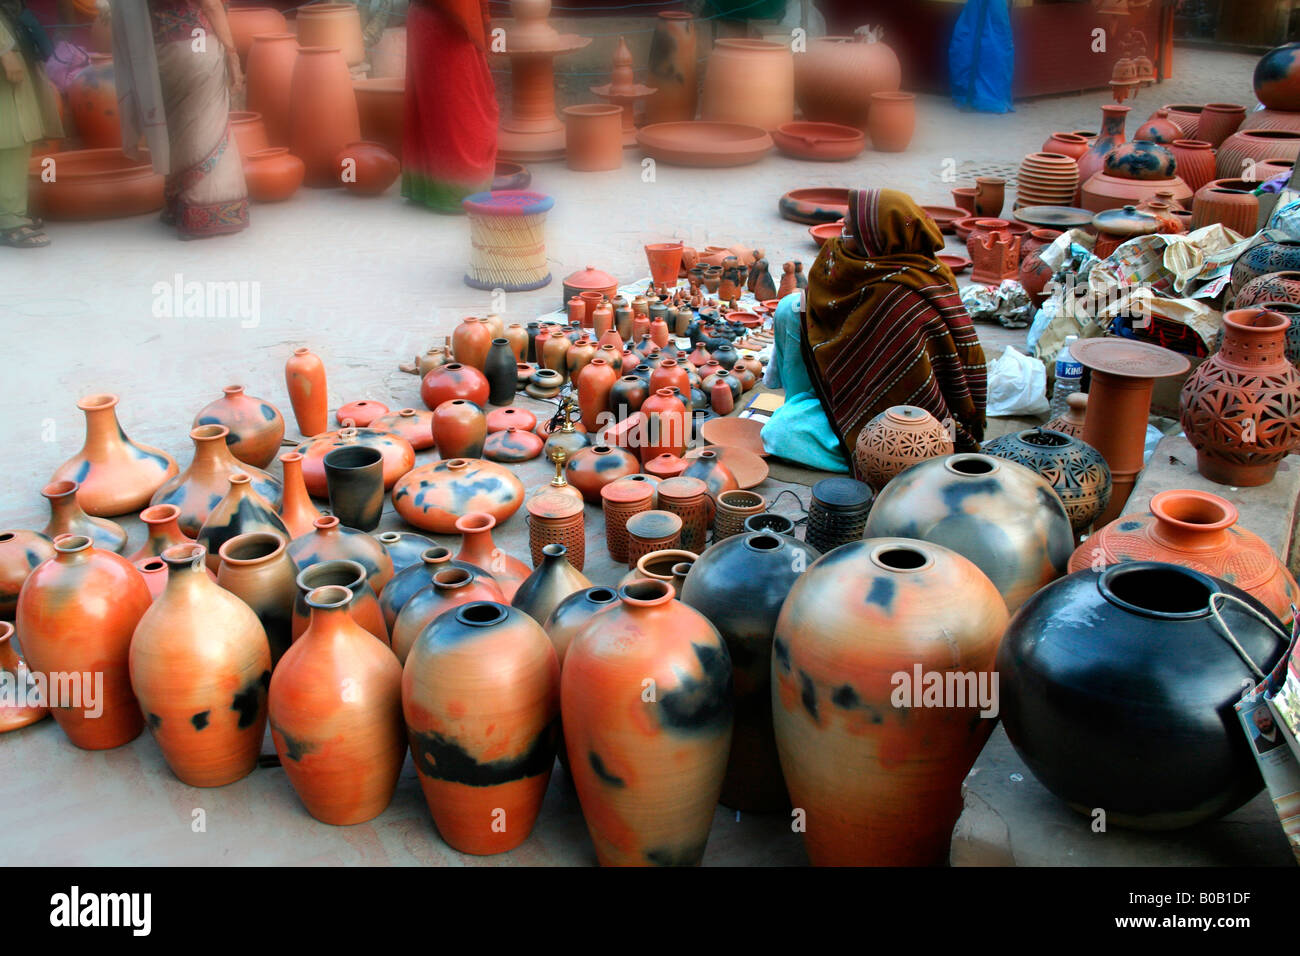 Old woman selling clay ceramic pottery - pots vases jugs - at a winter bazaar or local open-air market in New Delhi India Stock Photo